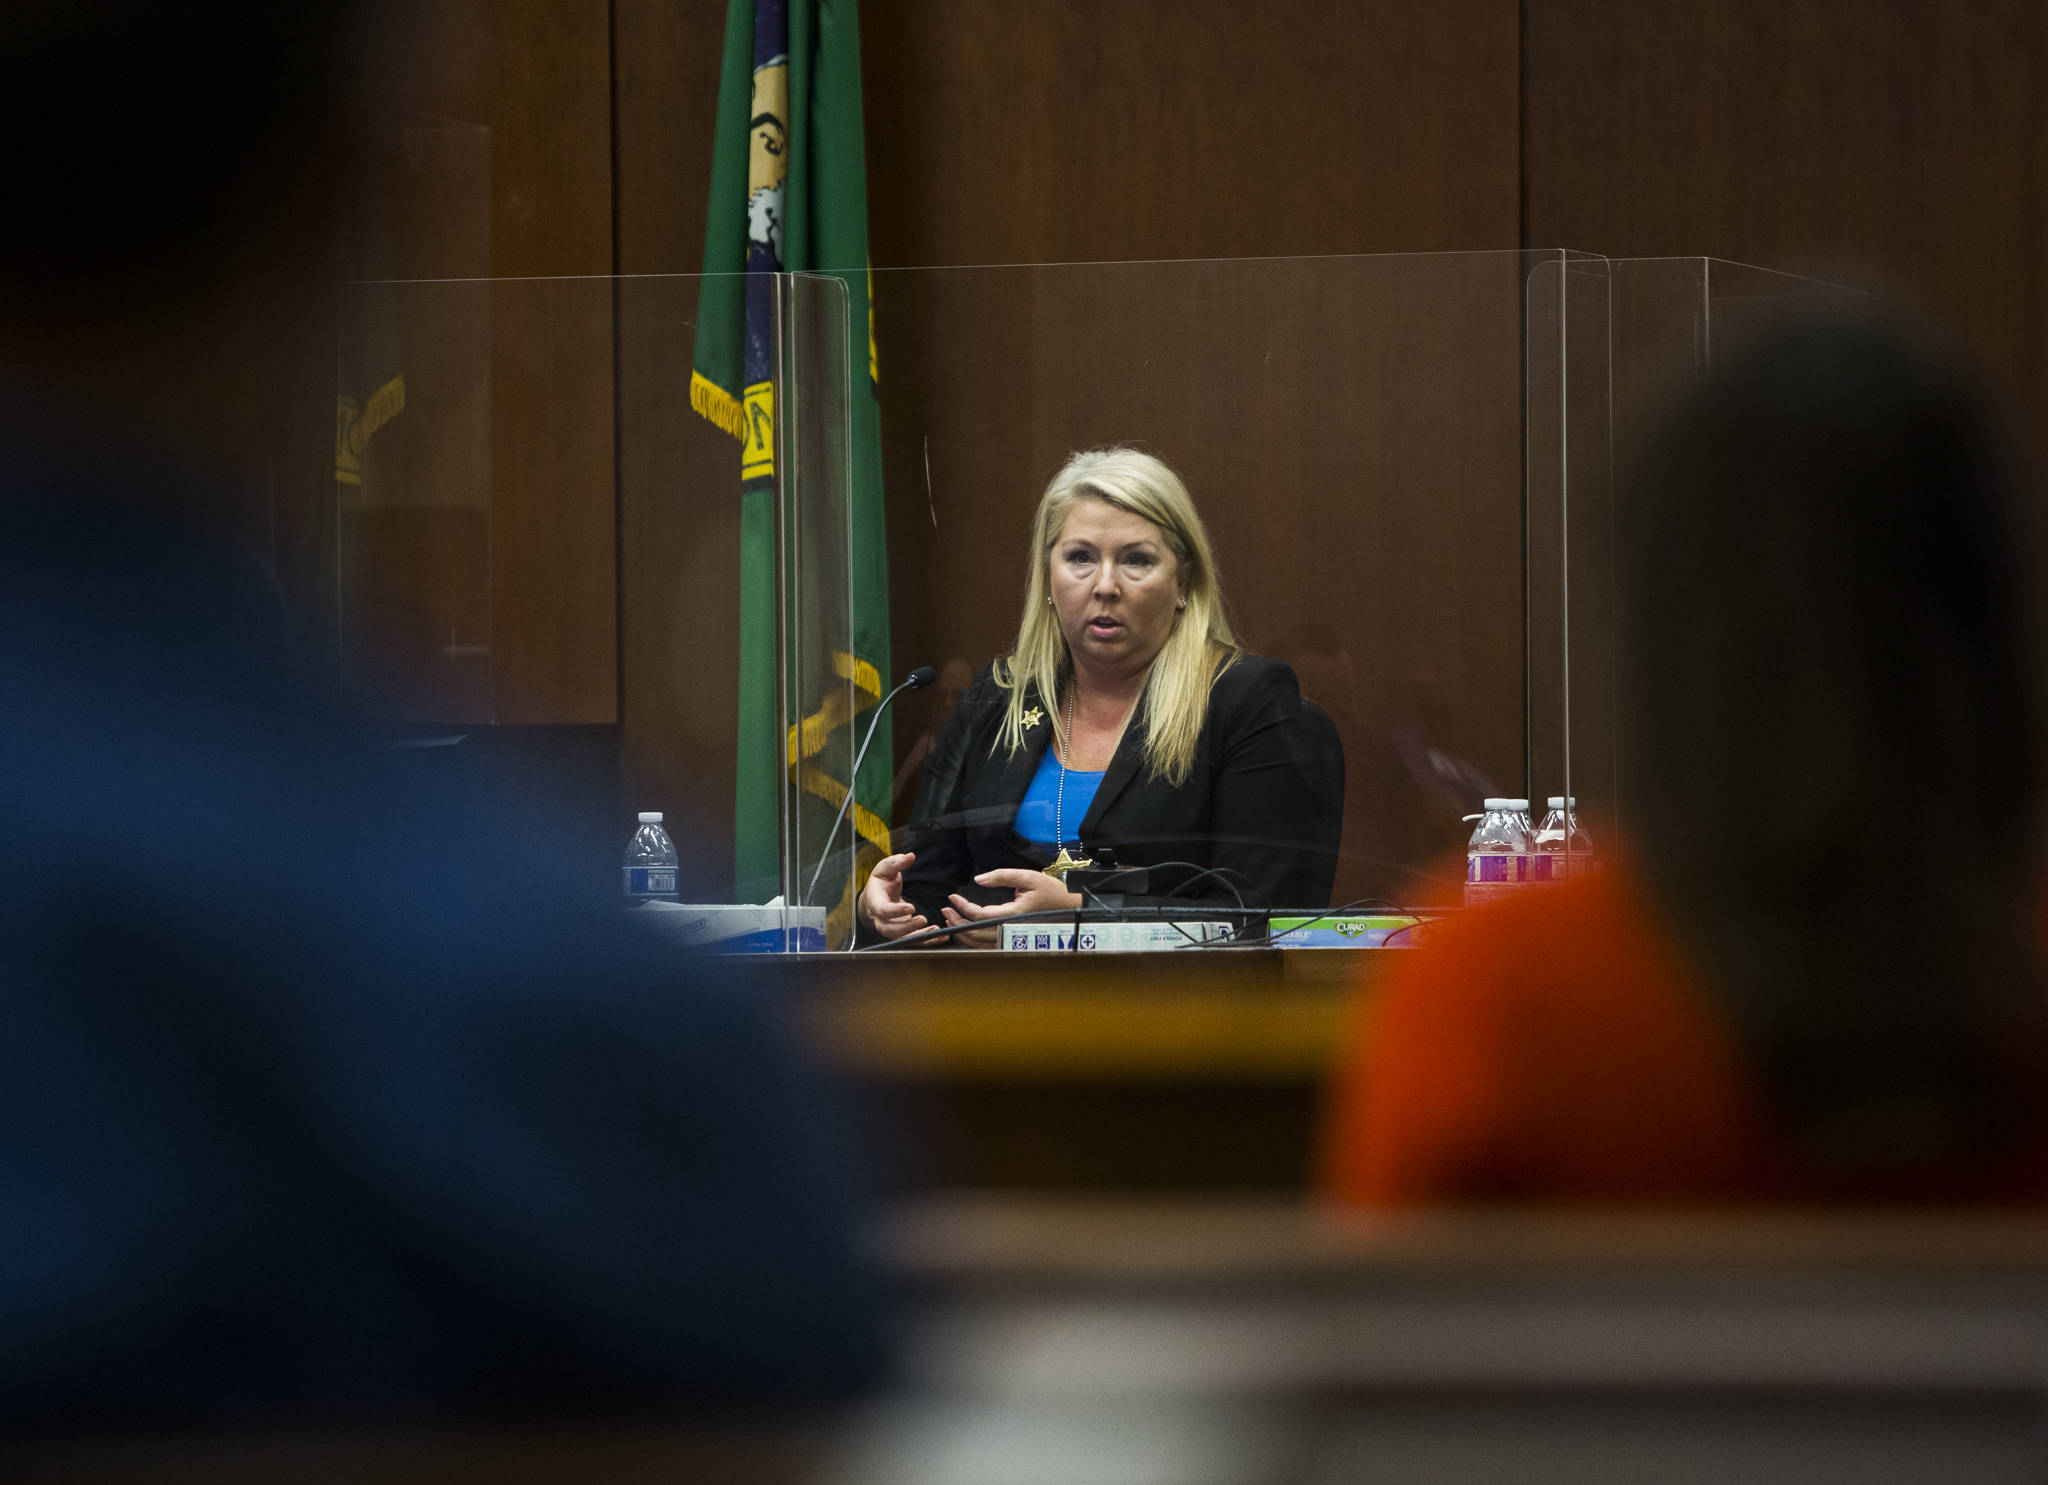 Olivia Vanni / The Herald
Snohomish County sheriff’s detective Kendra Conley testifies in the cold case murder trial of Terrence Miller at the Snohomish County Courthouse on Thursday in Everett.